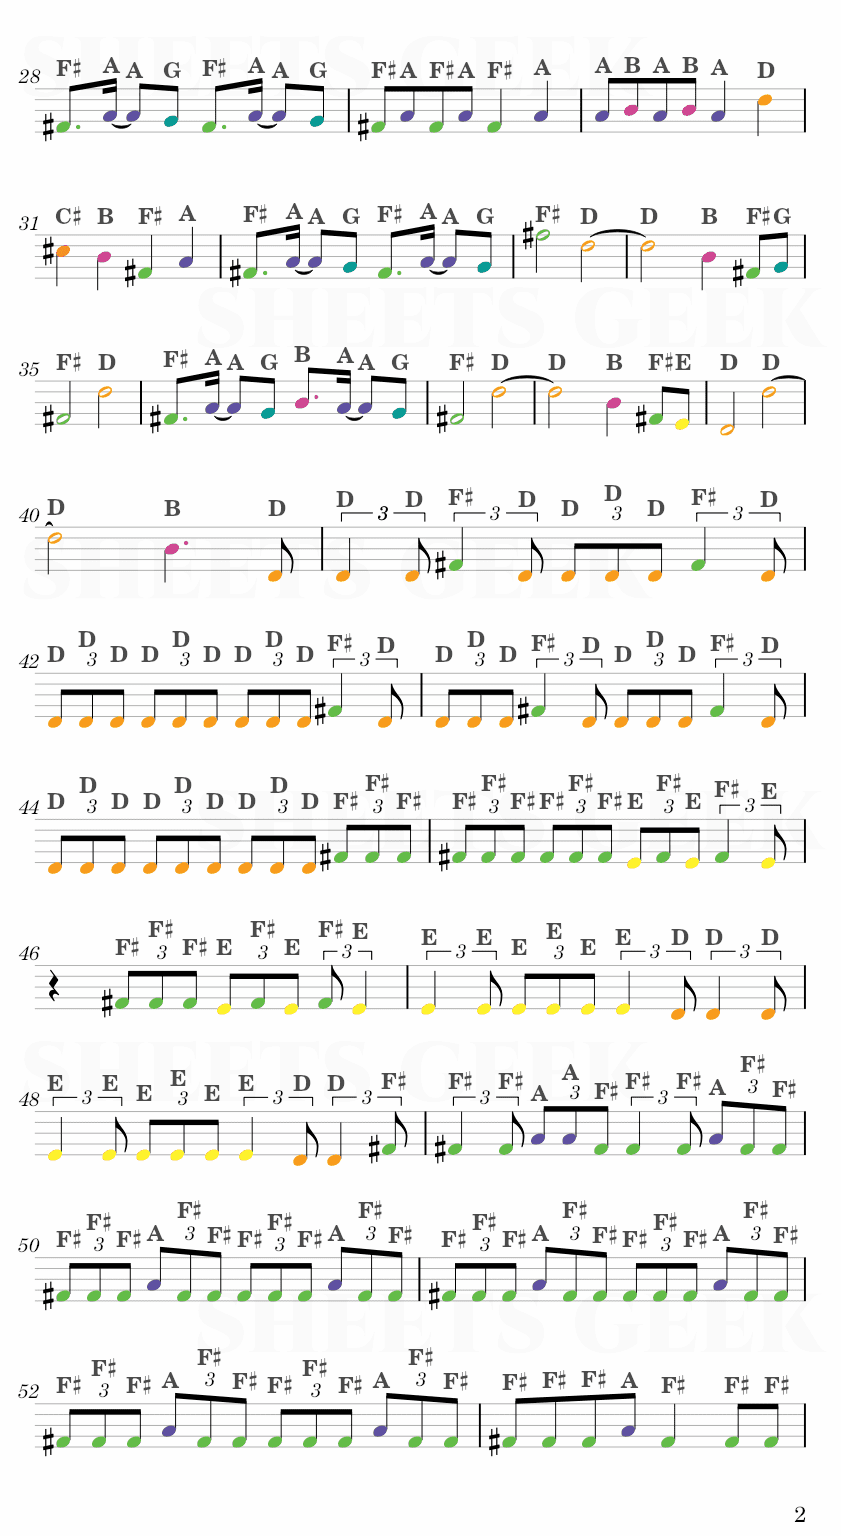 Ride - Twenty One Pilots Easy Sheet Music Free for piano, keyboard, flute, violin, sax, cello page 2